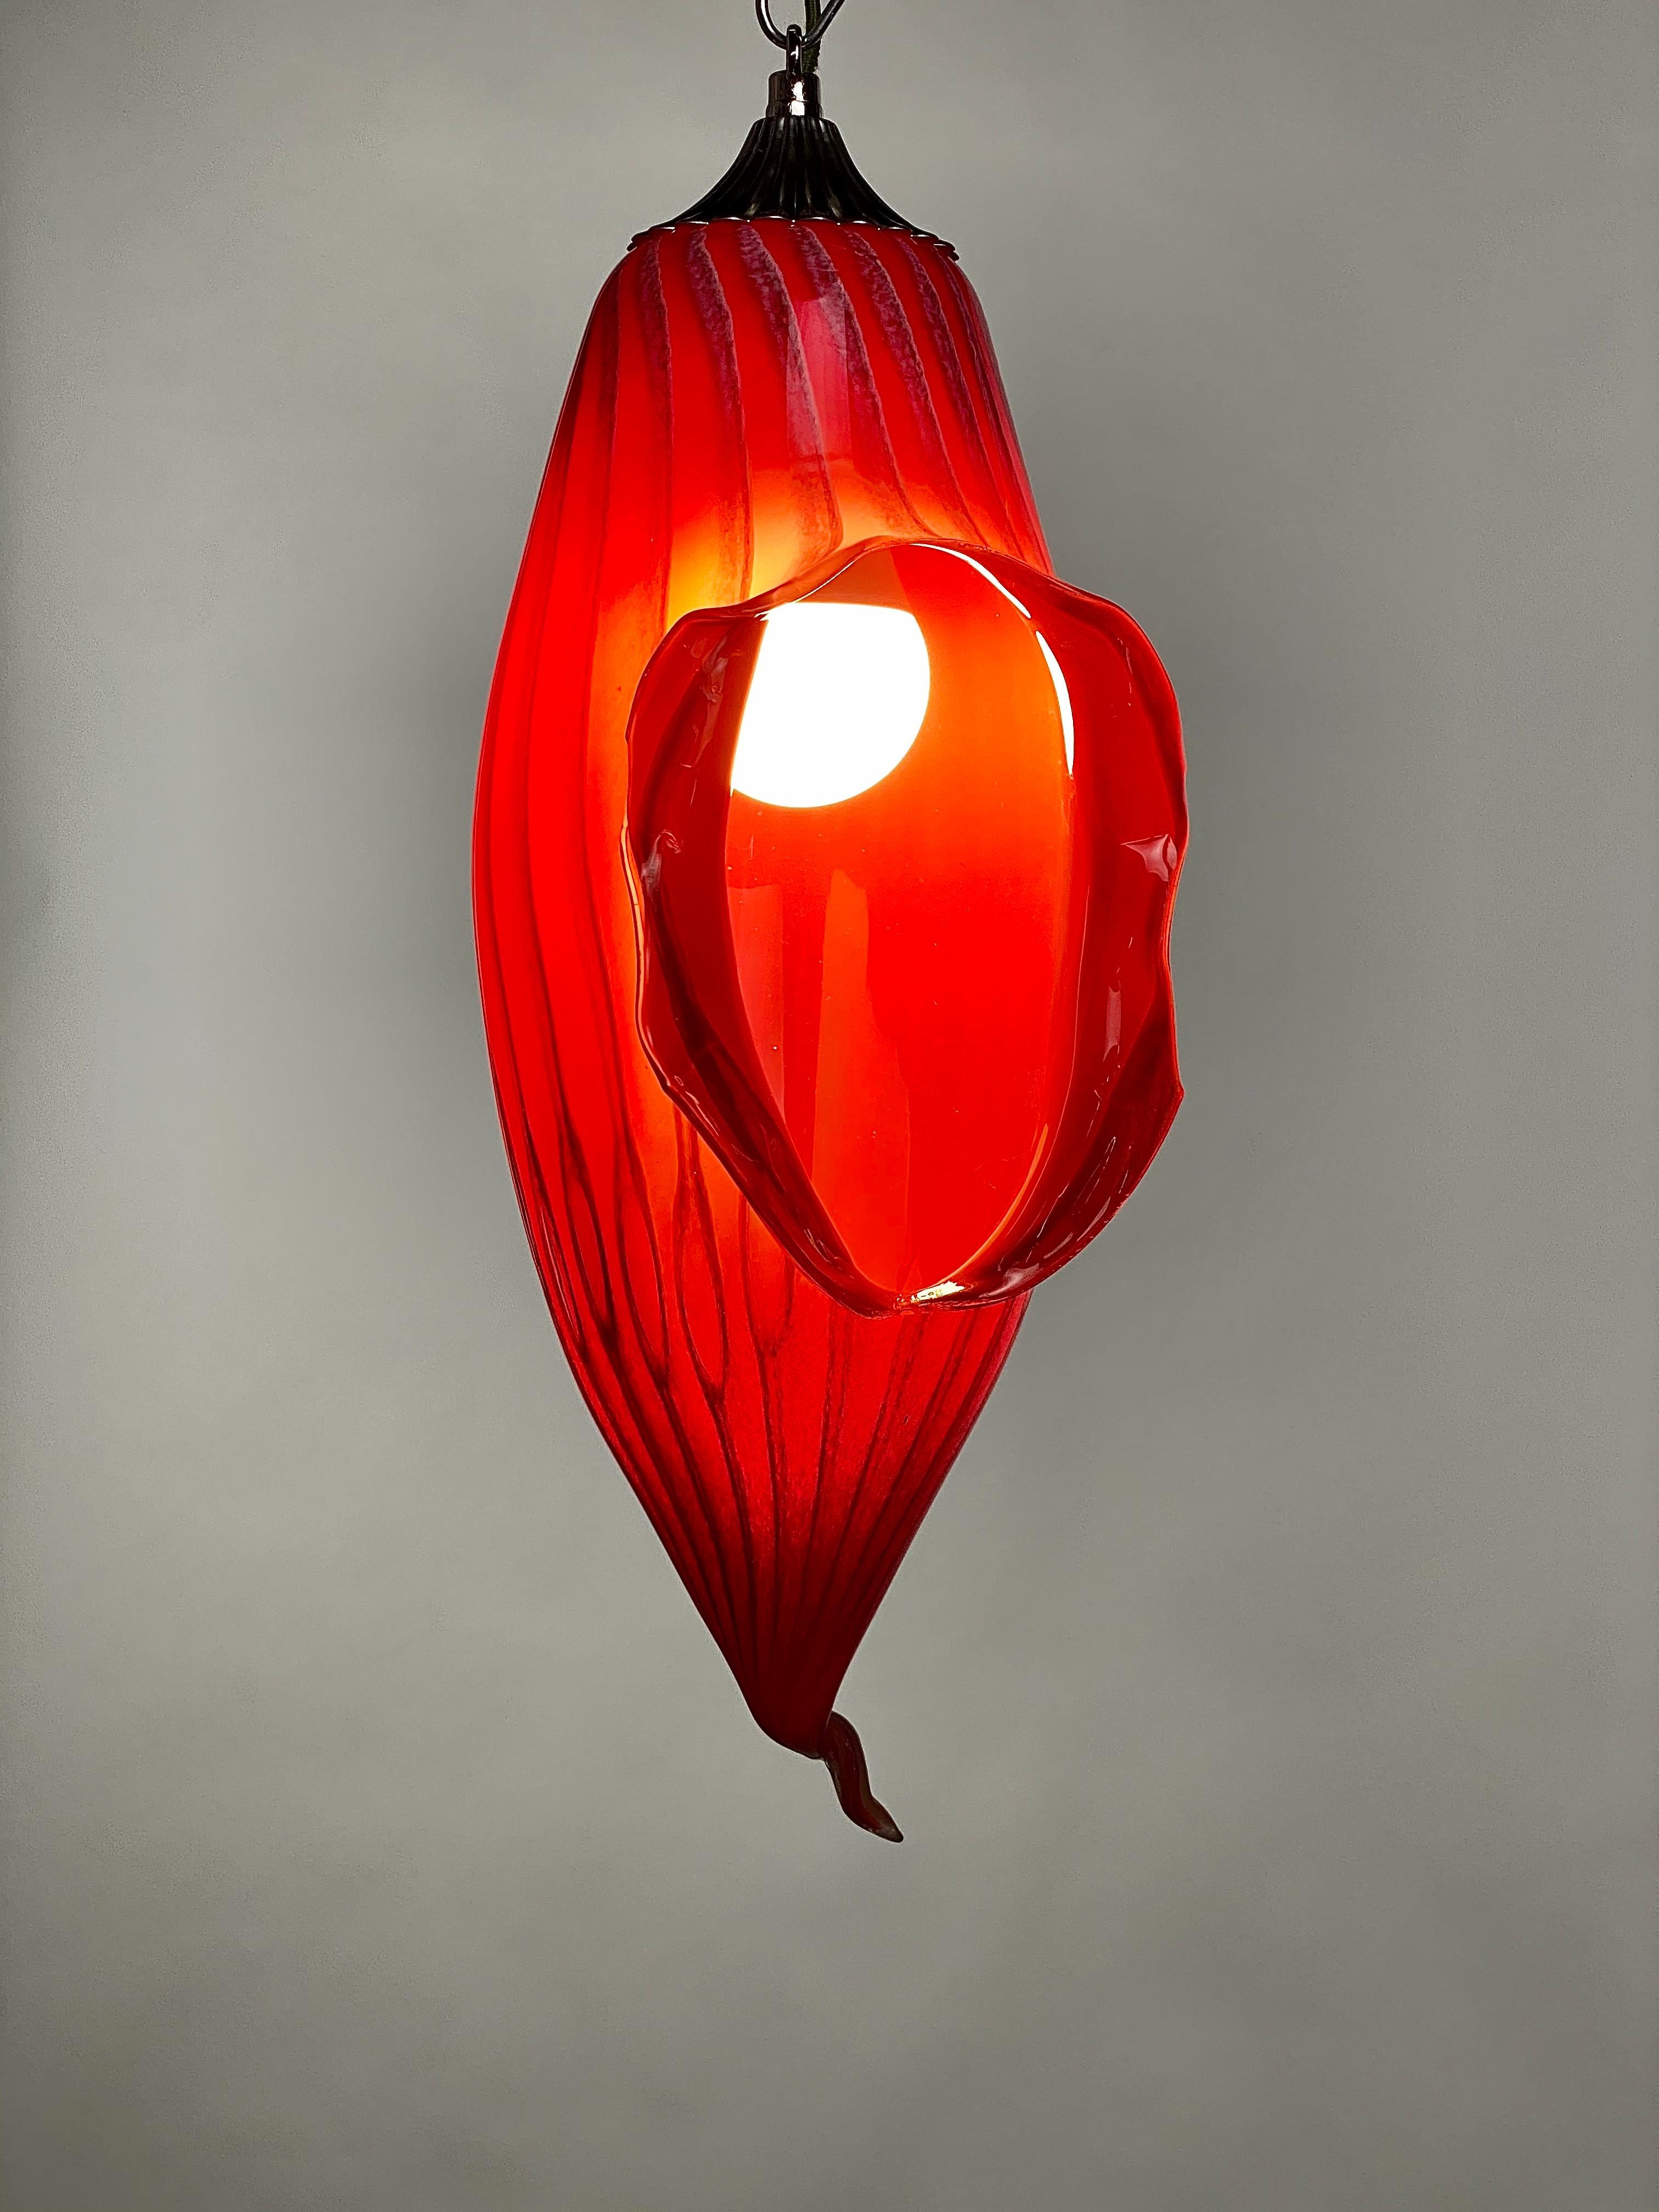 Contemporary Red Blown Glass Table or Pendent Light, 21st Century by Mattia Biagi For Sale